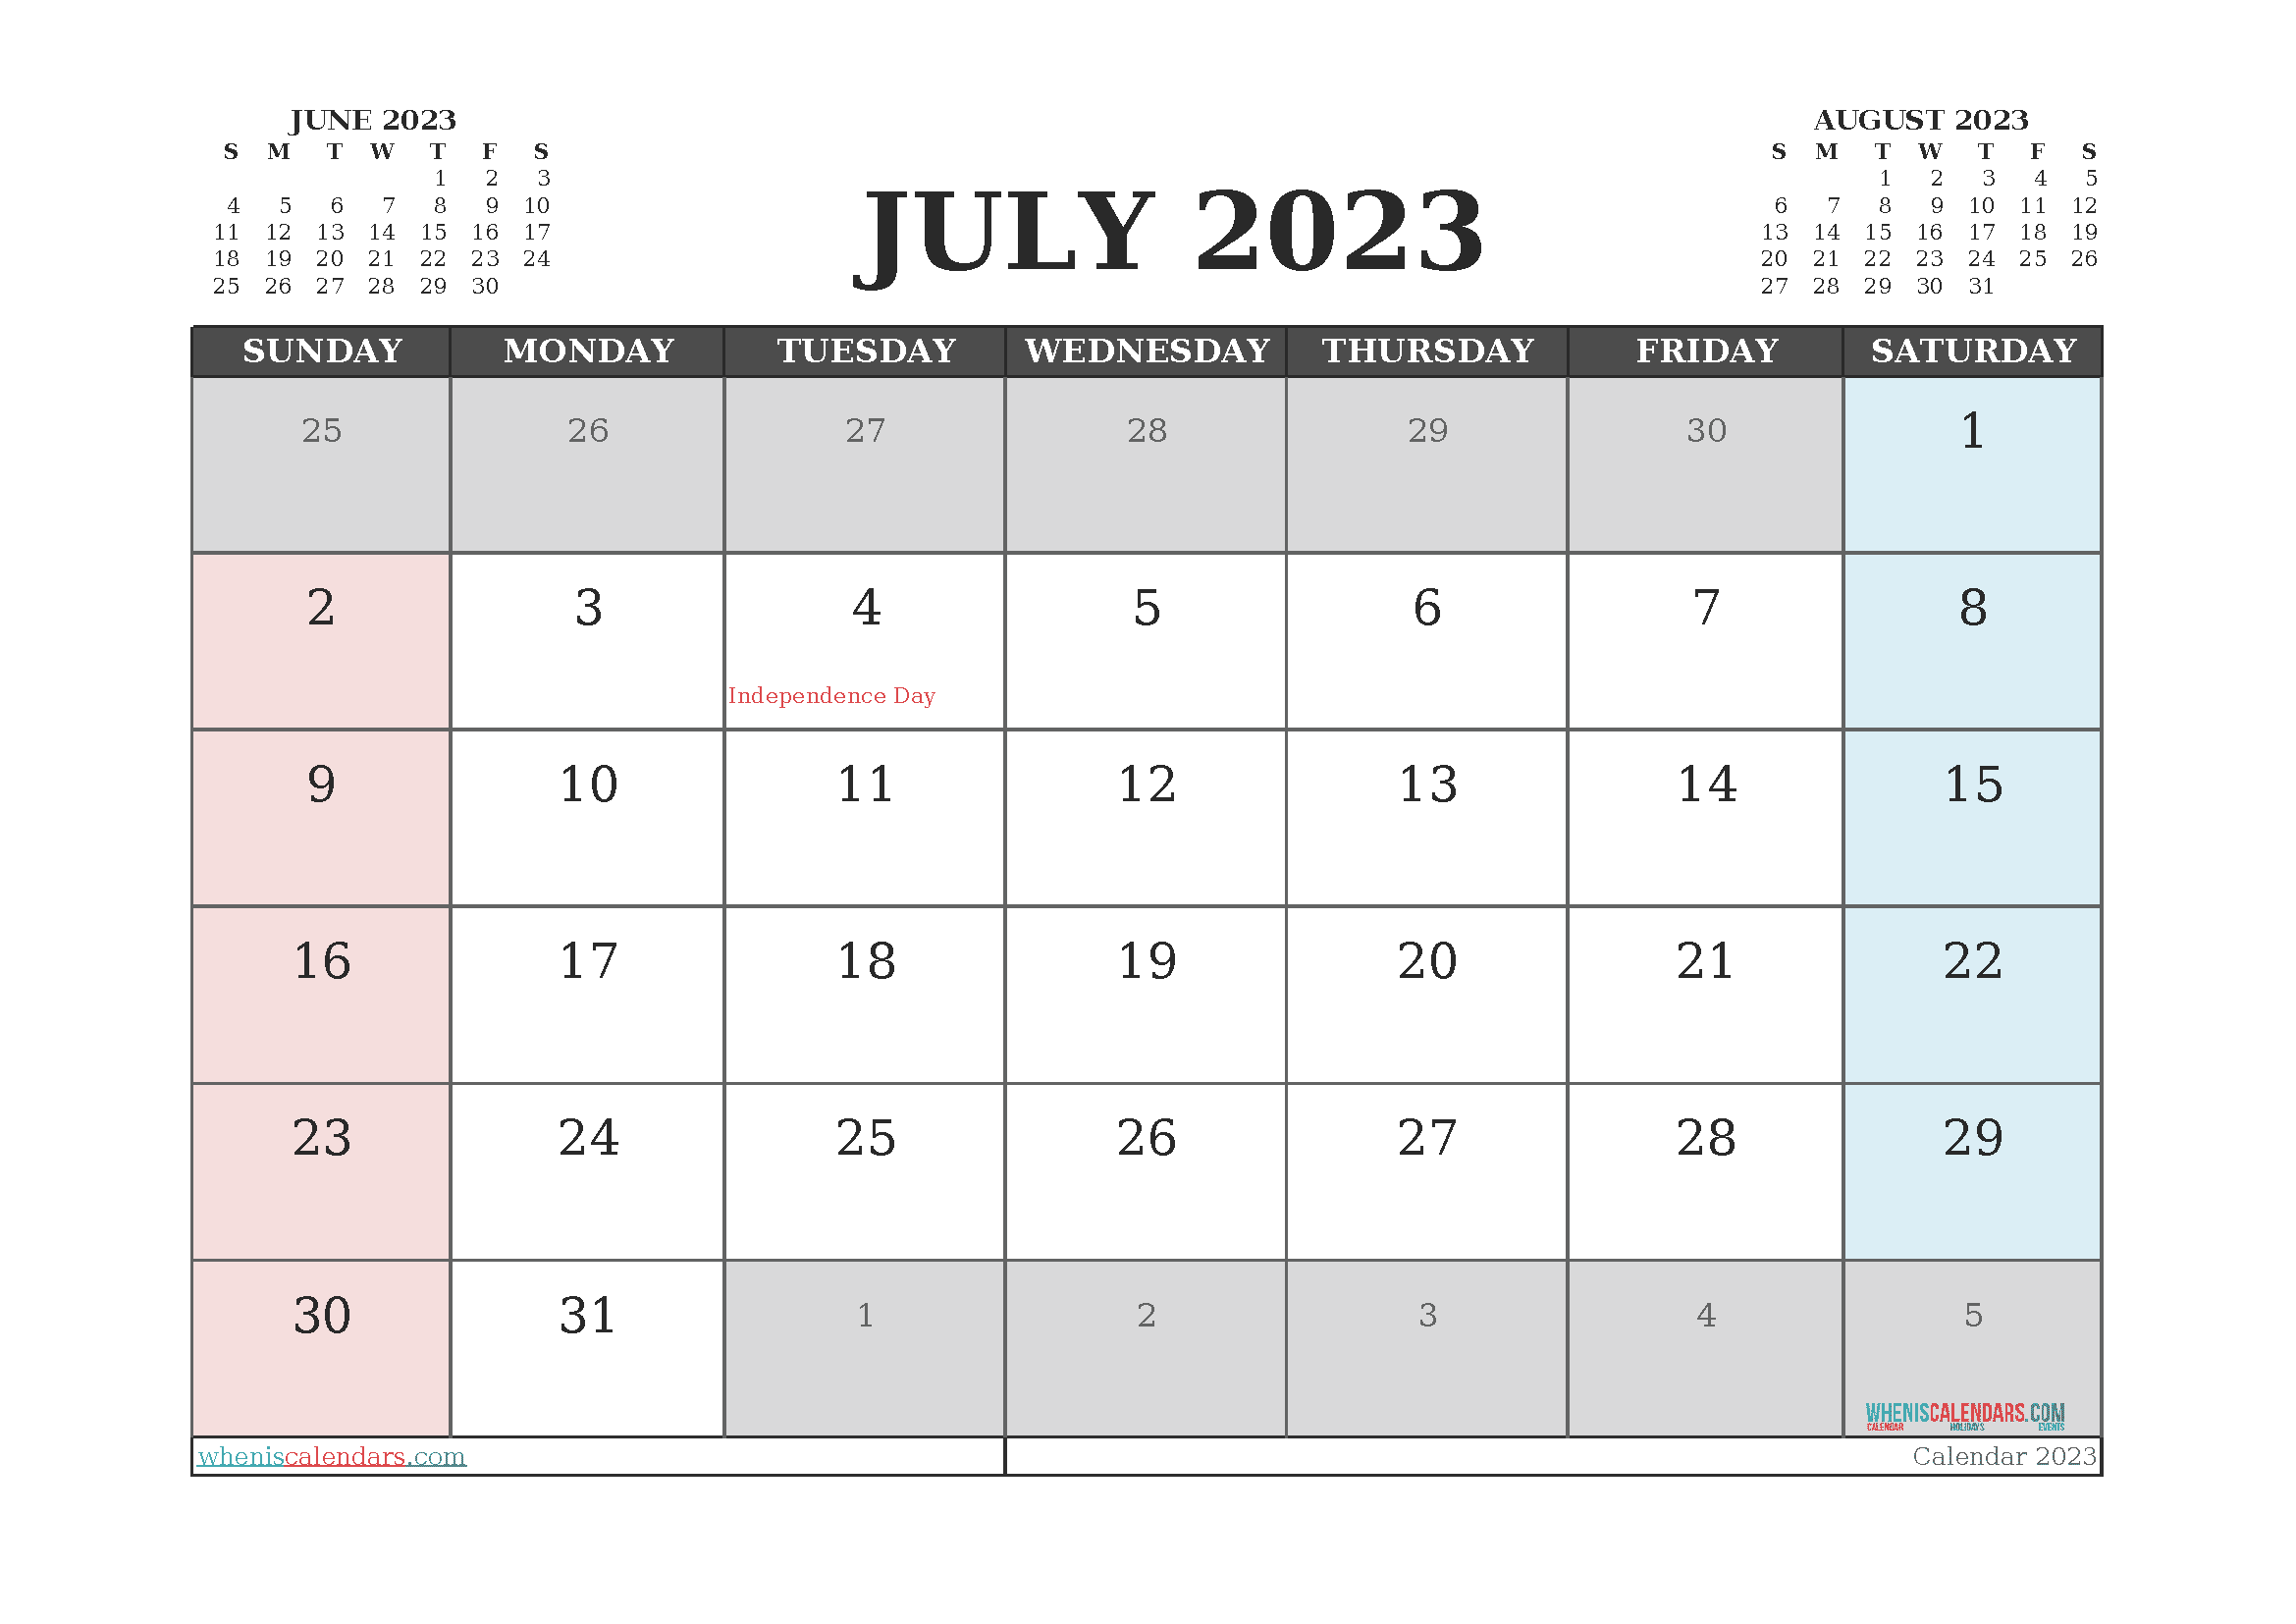 Free Calendar 2023 July with Holidays PDF in Landscape